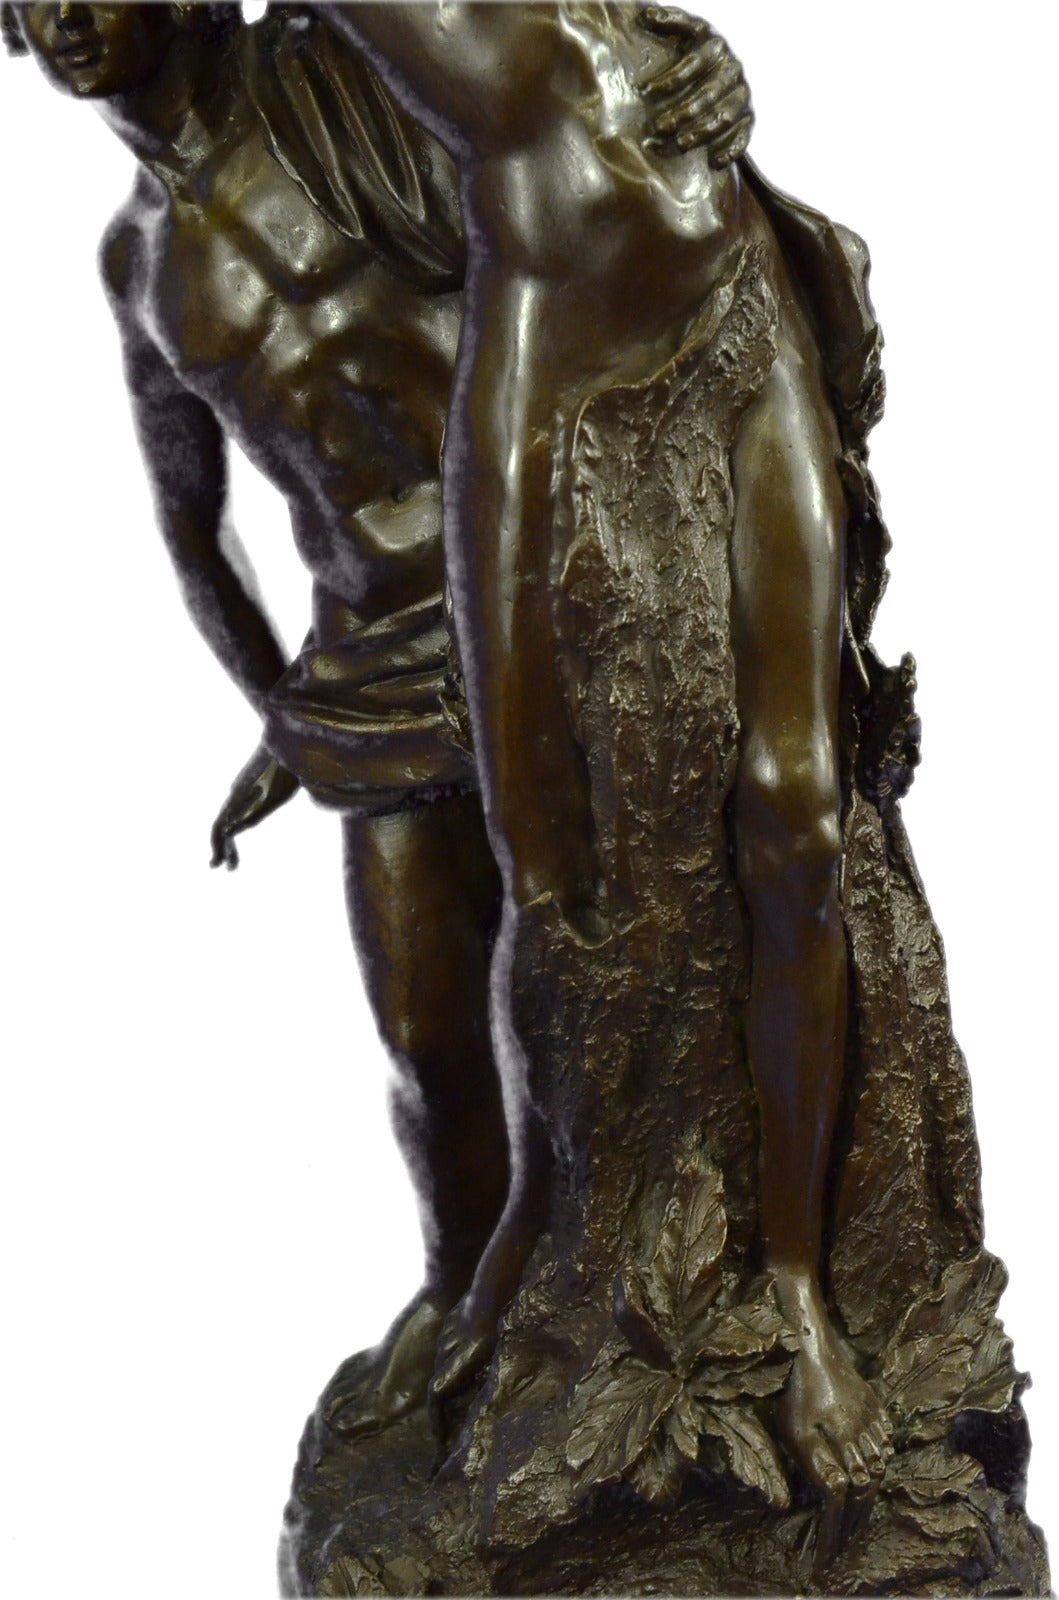 Extra Large 75 LBS Apollo and Daphne Mythical Greek Mythology Bronze Sculpture